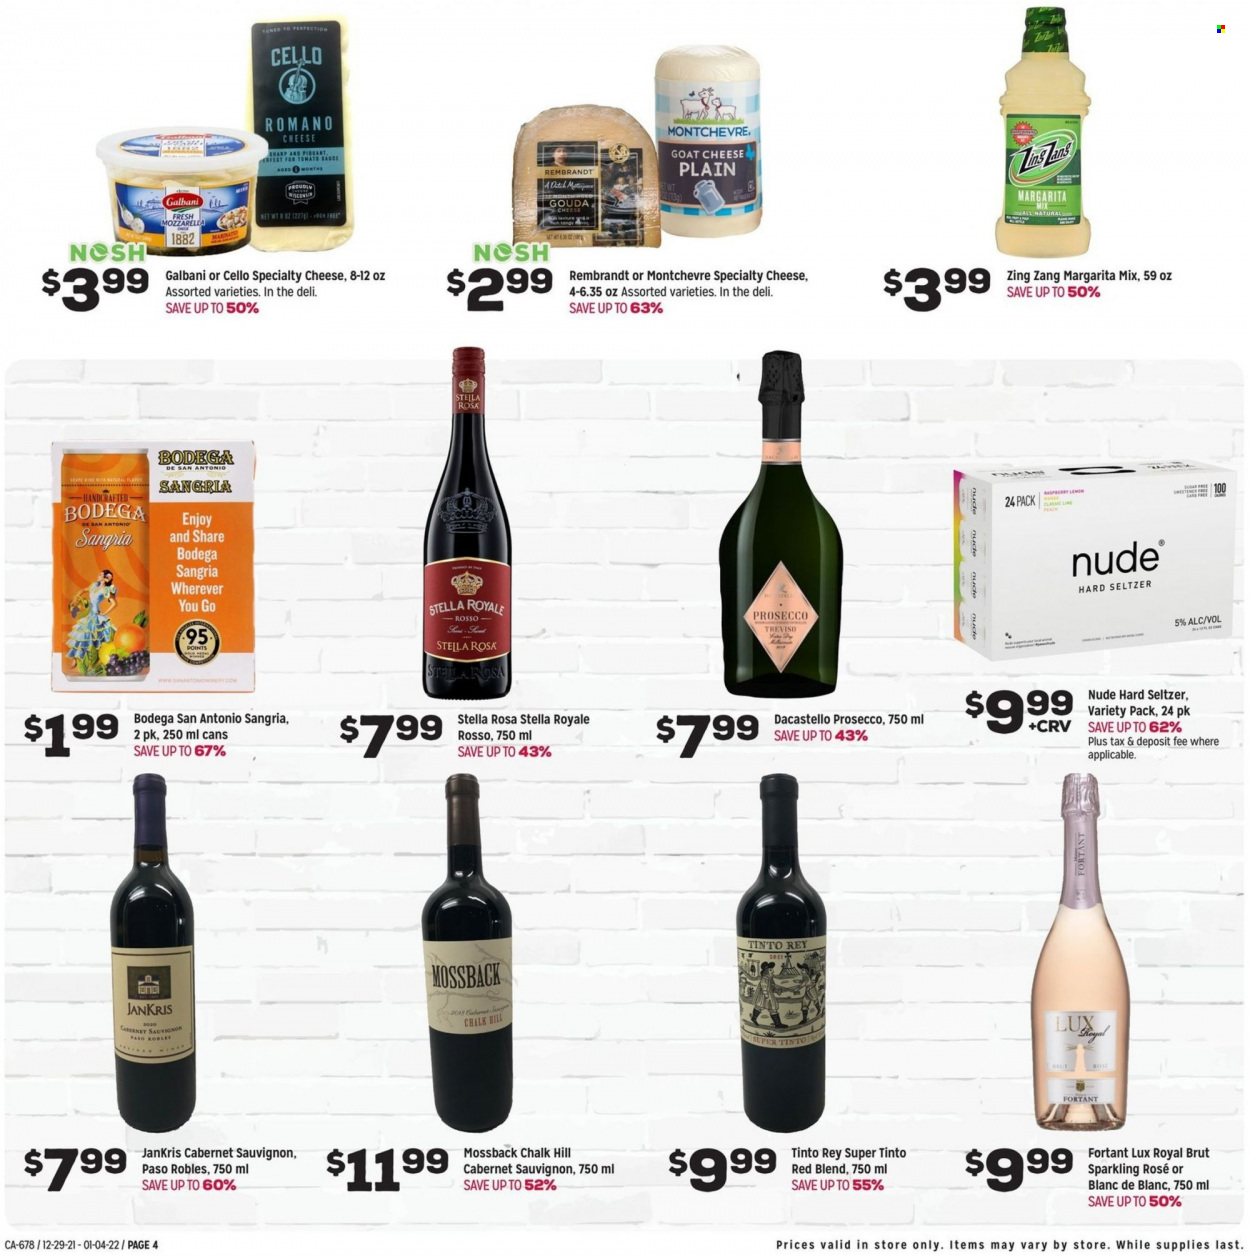 Grocery Outlet ad  - 12.29.2021 - 01.04.2022.